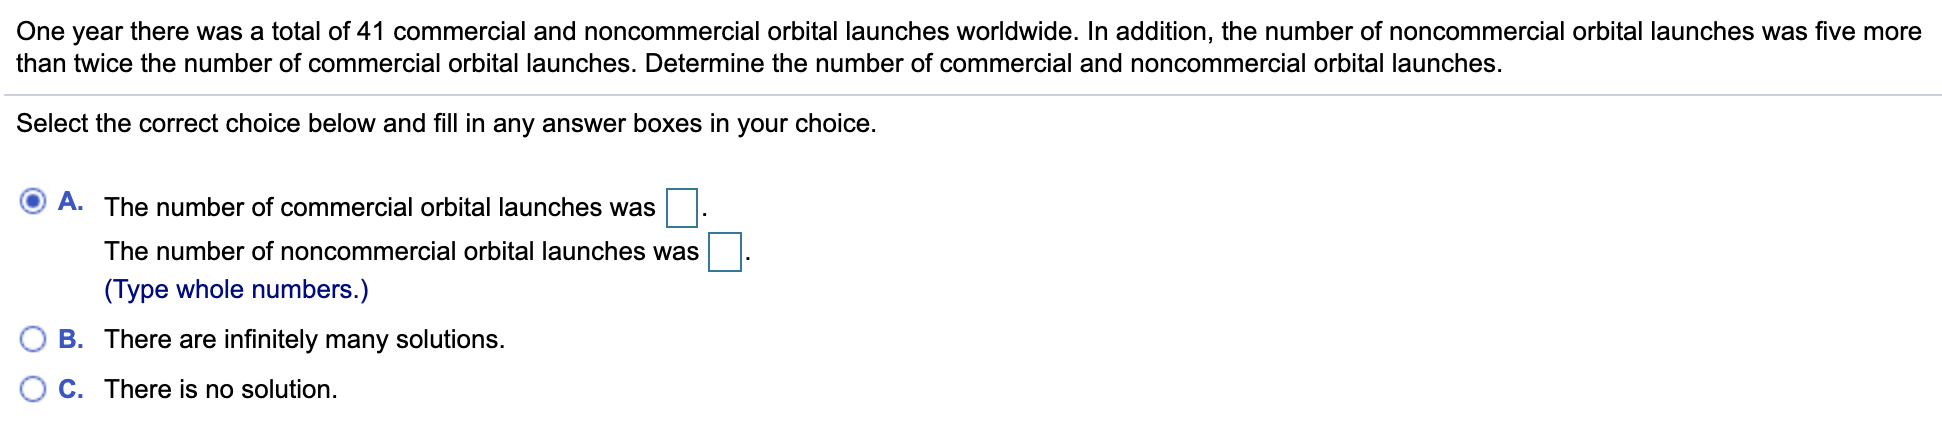 One year there was a total of 41 commercial and noncommercial orbital launches worldwide. In addition, the number of noncommercial orbital launches was five more
than twice the number of commercial orbital launches. Determine the number of commercial and noncommercial orbital launches.
Select the correct choice below and fill in any answer boxes in your choice.
A. The number of commercial orbital launches was
The number of noncommercial orbital launches was
(Type whole numbers.)
B. There are infinitely many solutions.
C. There is no solution.
